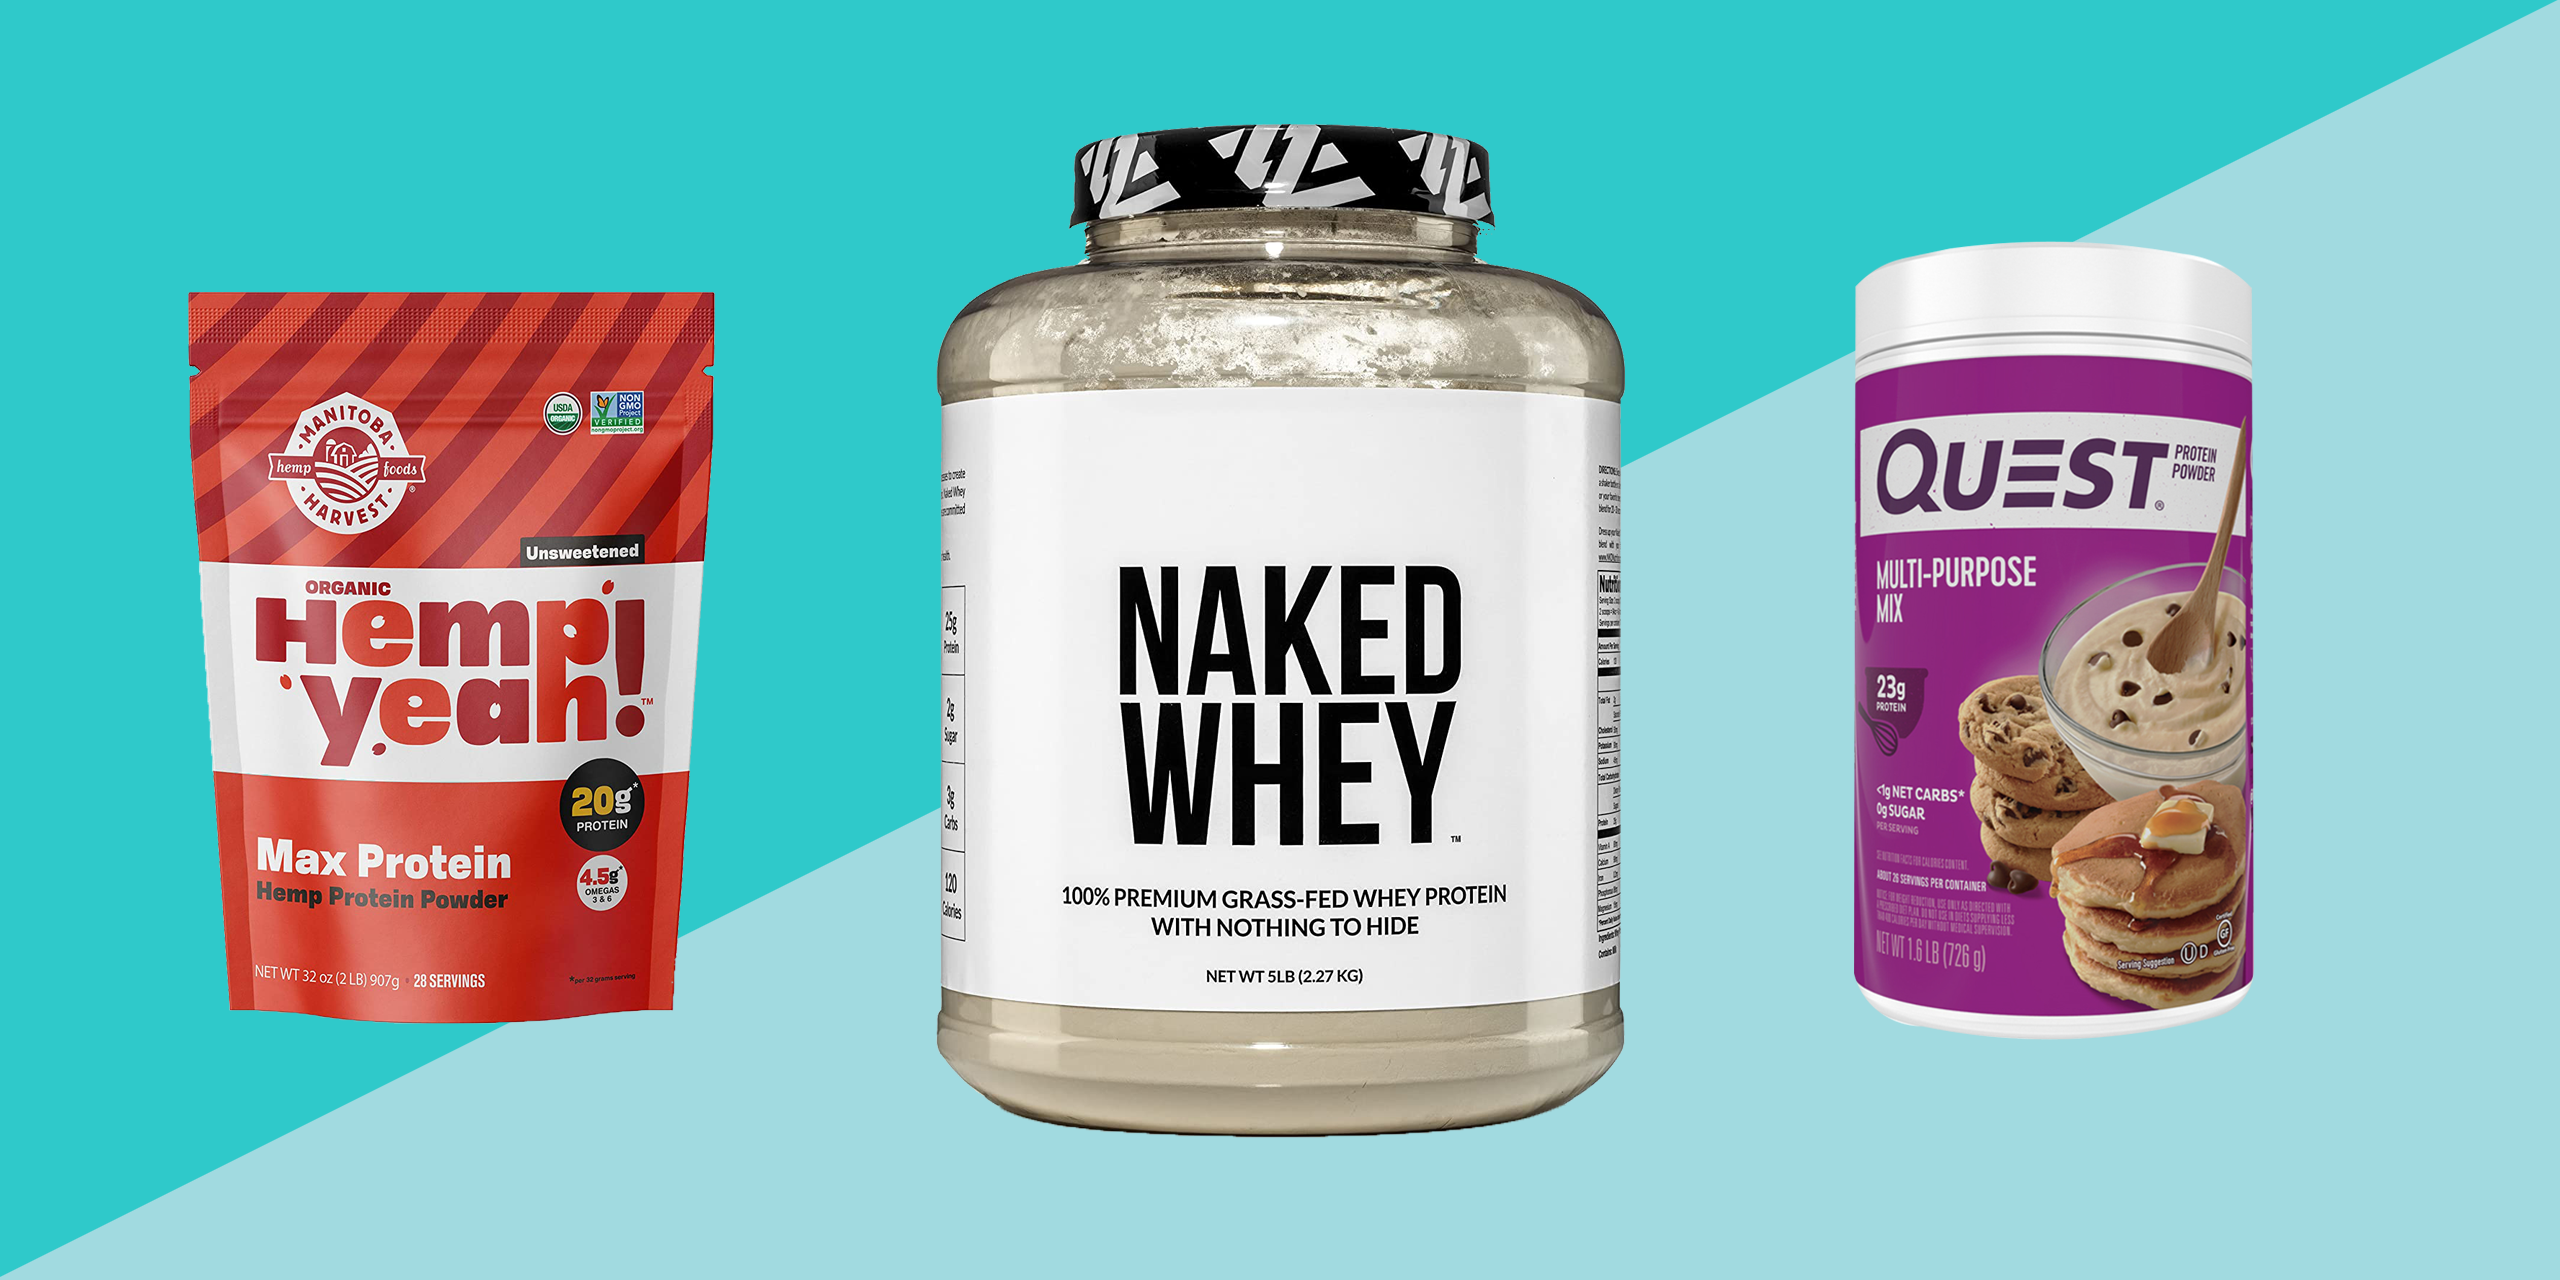 What Women Want Healthy Hair Skin and Nails with Whey Protein